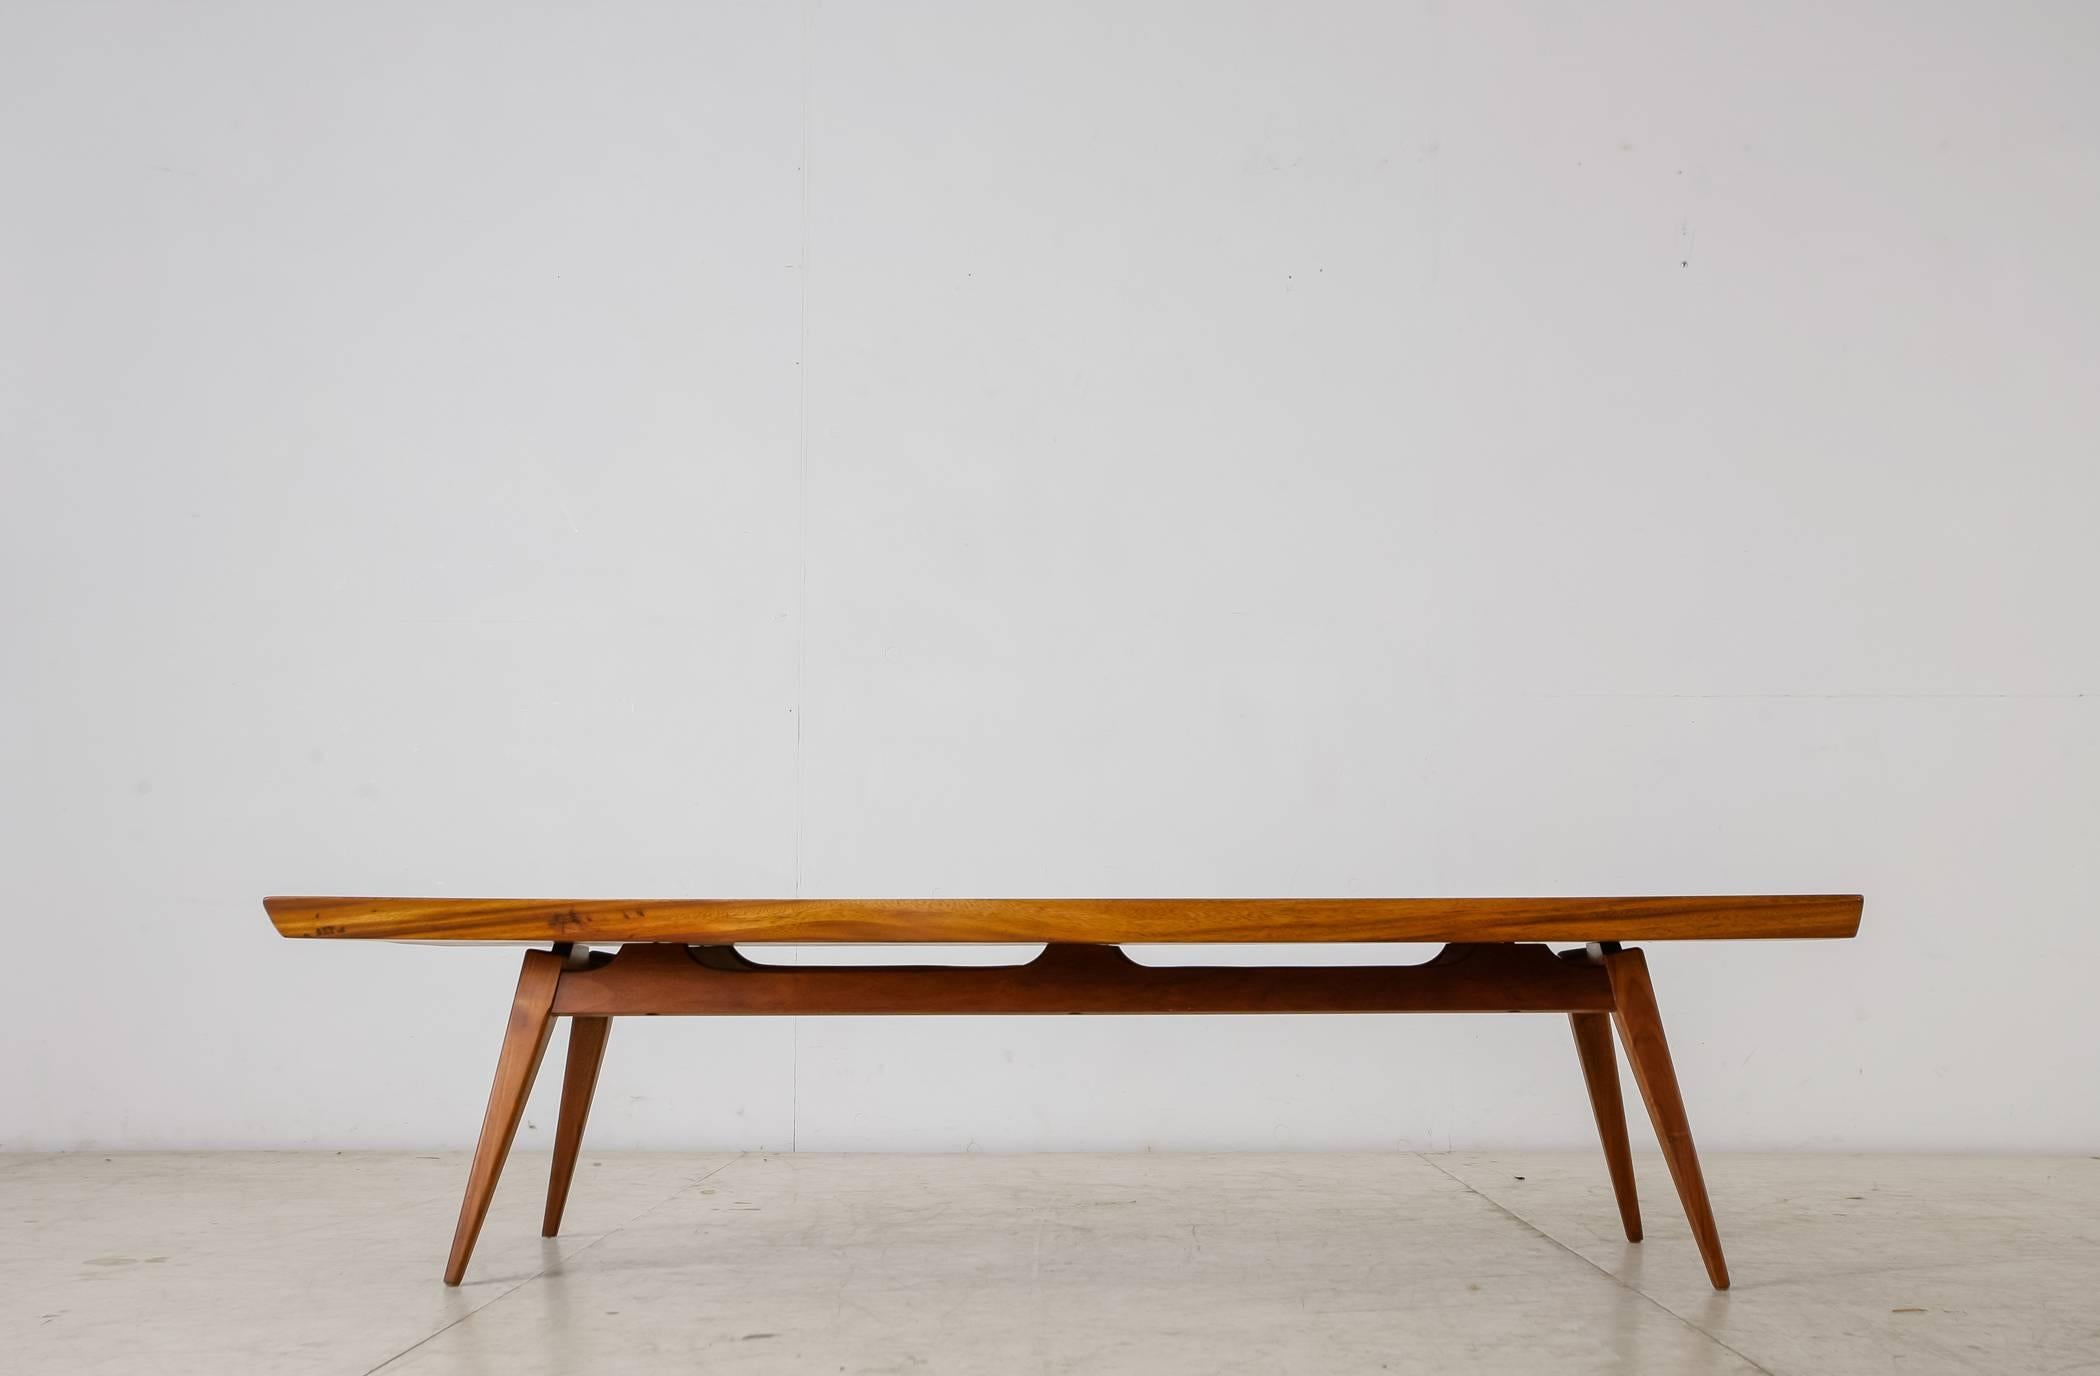 A studio crafted, organically shaped, wooden coffee table by American woodturner Rude Osolnik. This table is signed by Osolnik and in a great condition.

Osolnik (1915-2001) was one of the most important post-war American craftsmen. The Queen of